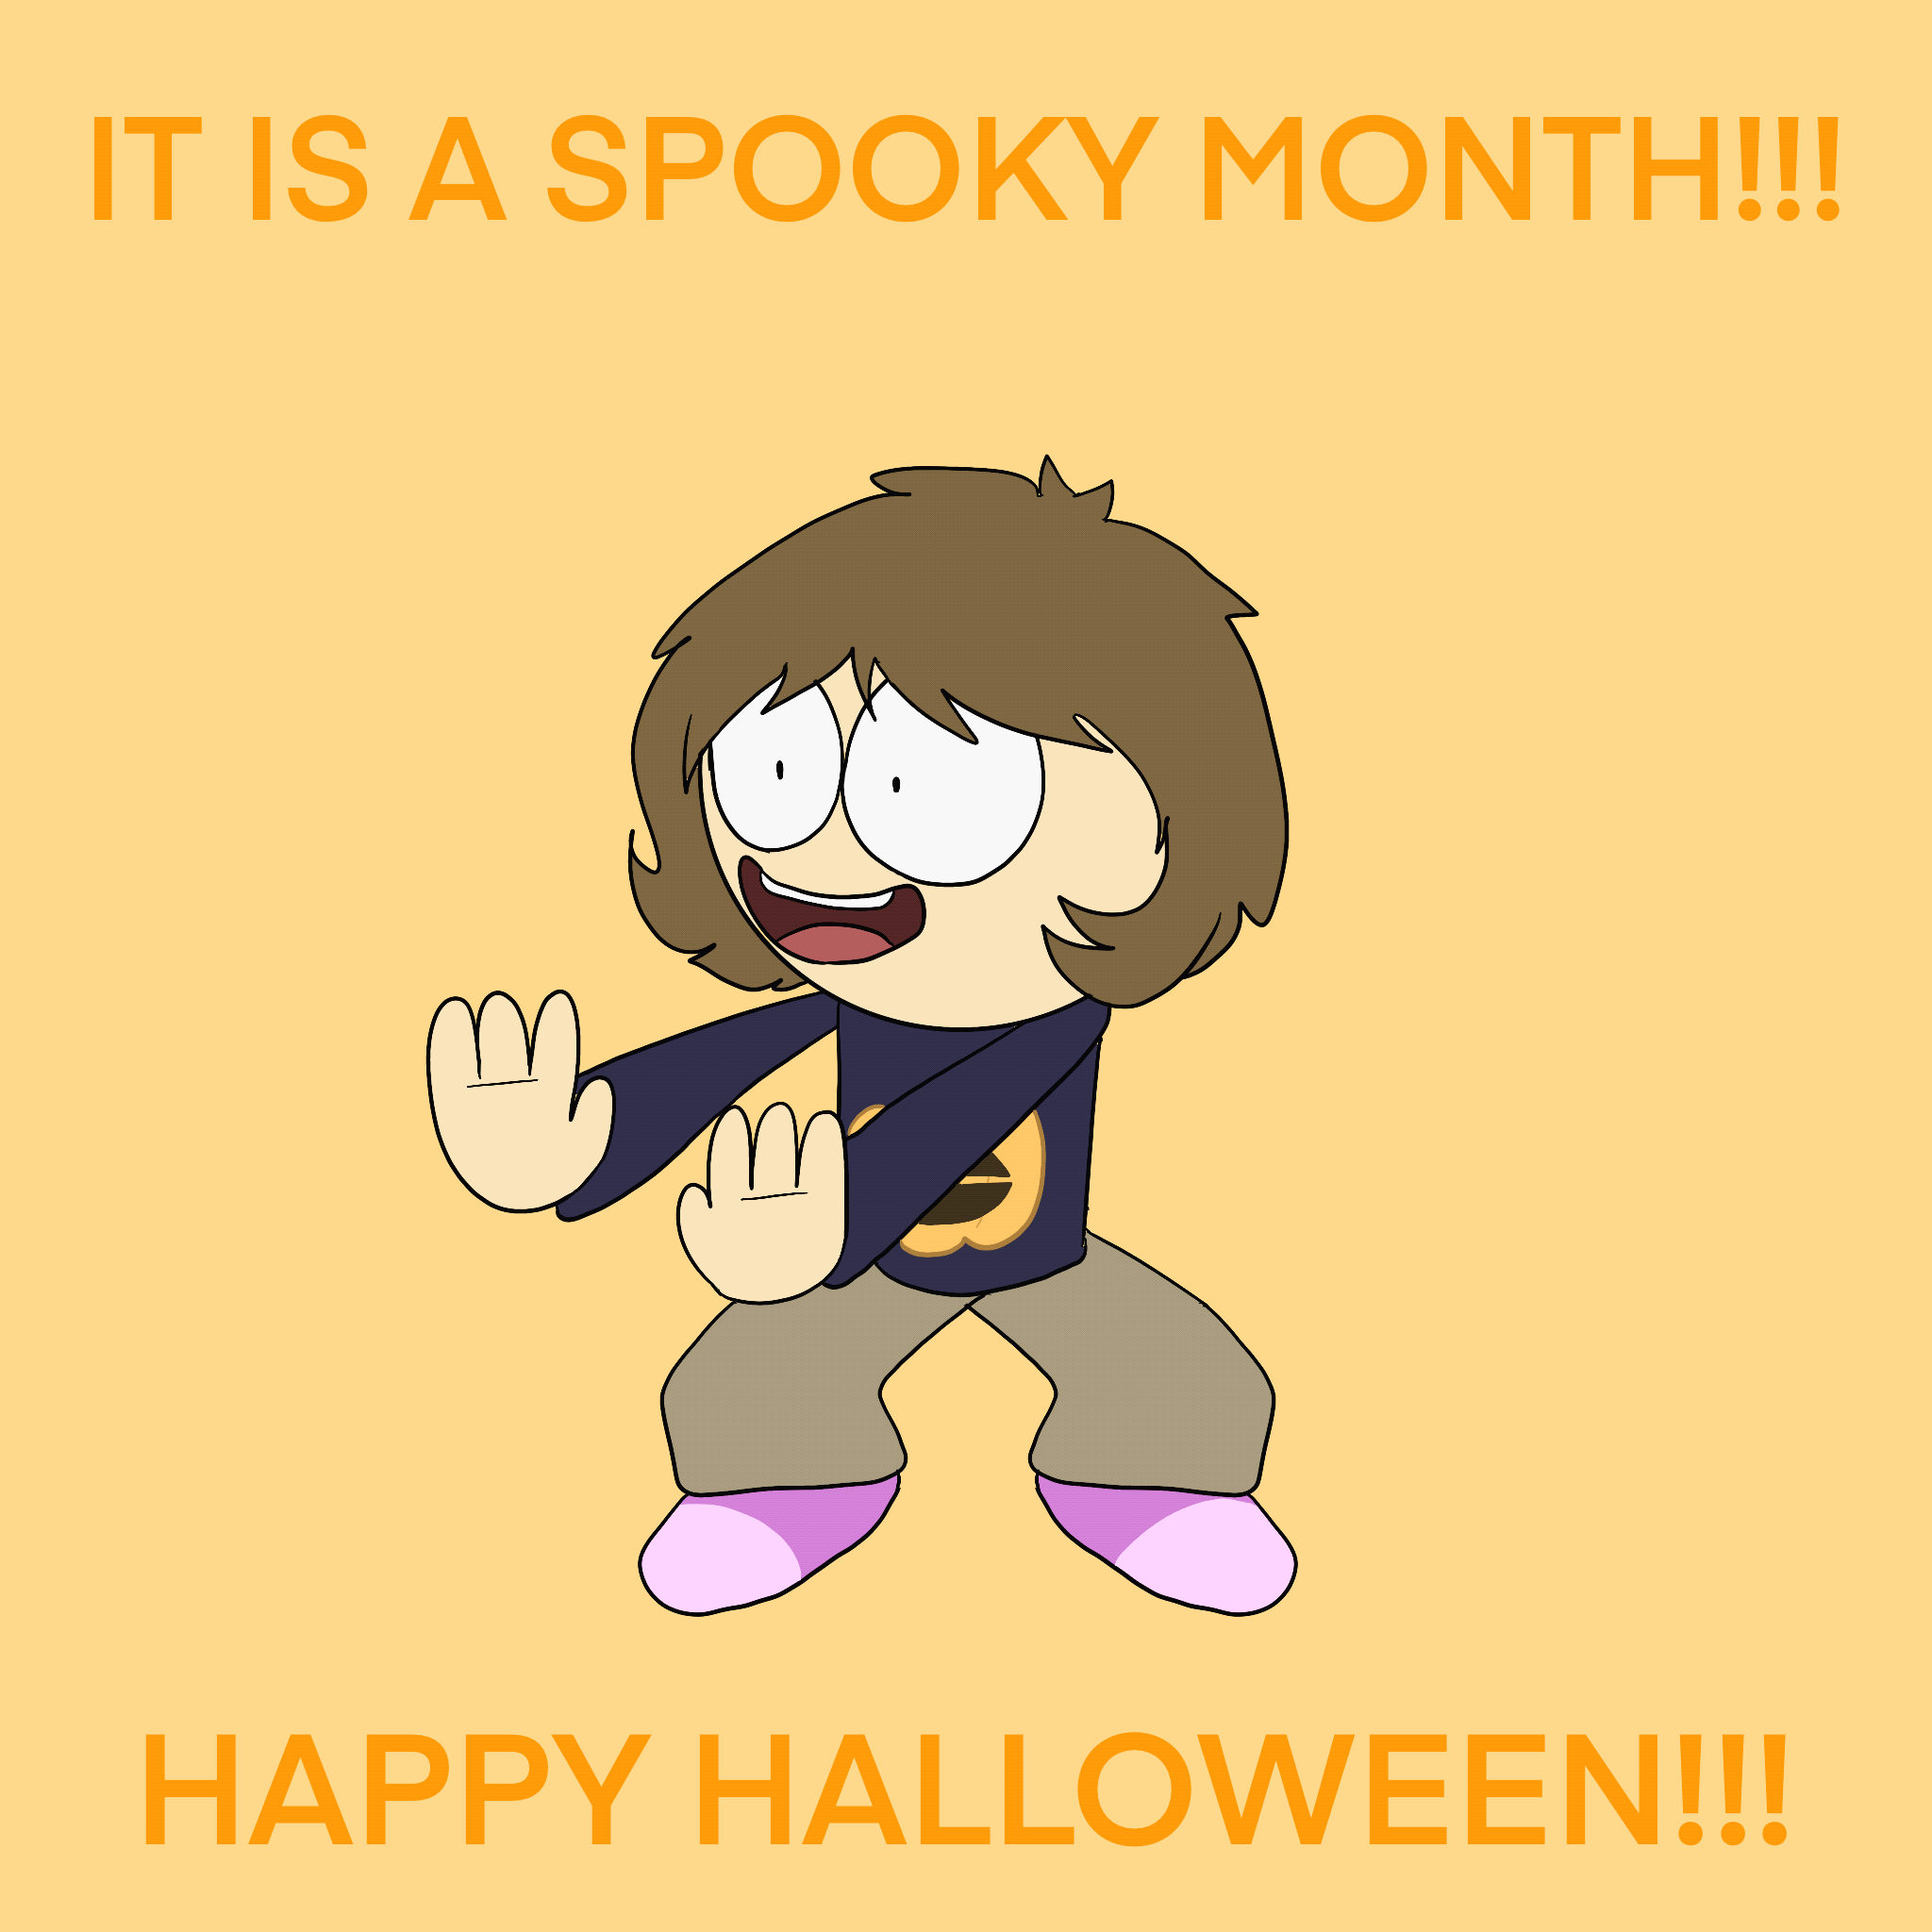 IT'S A SPOOKY MONTH!! (Animated Gif) by Tyro1301 on DeviantArt